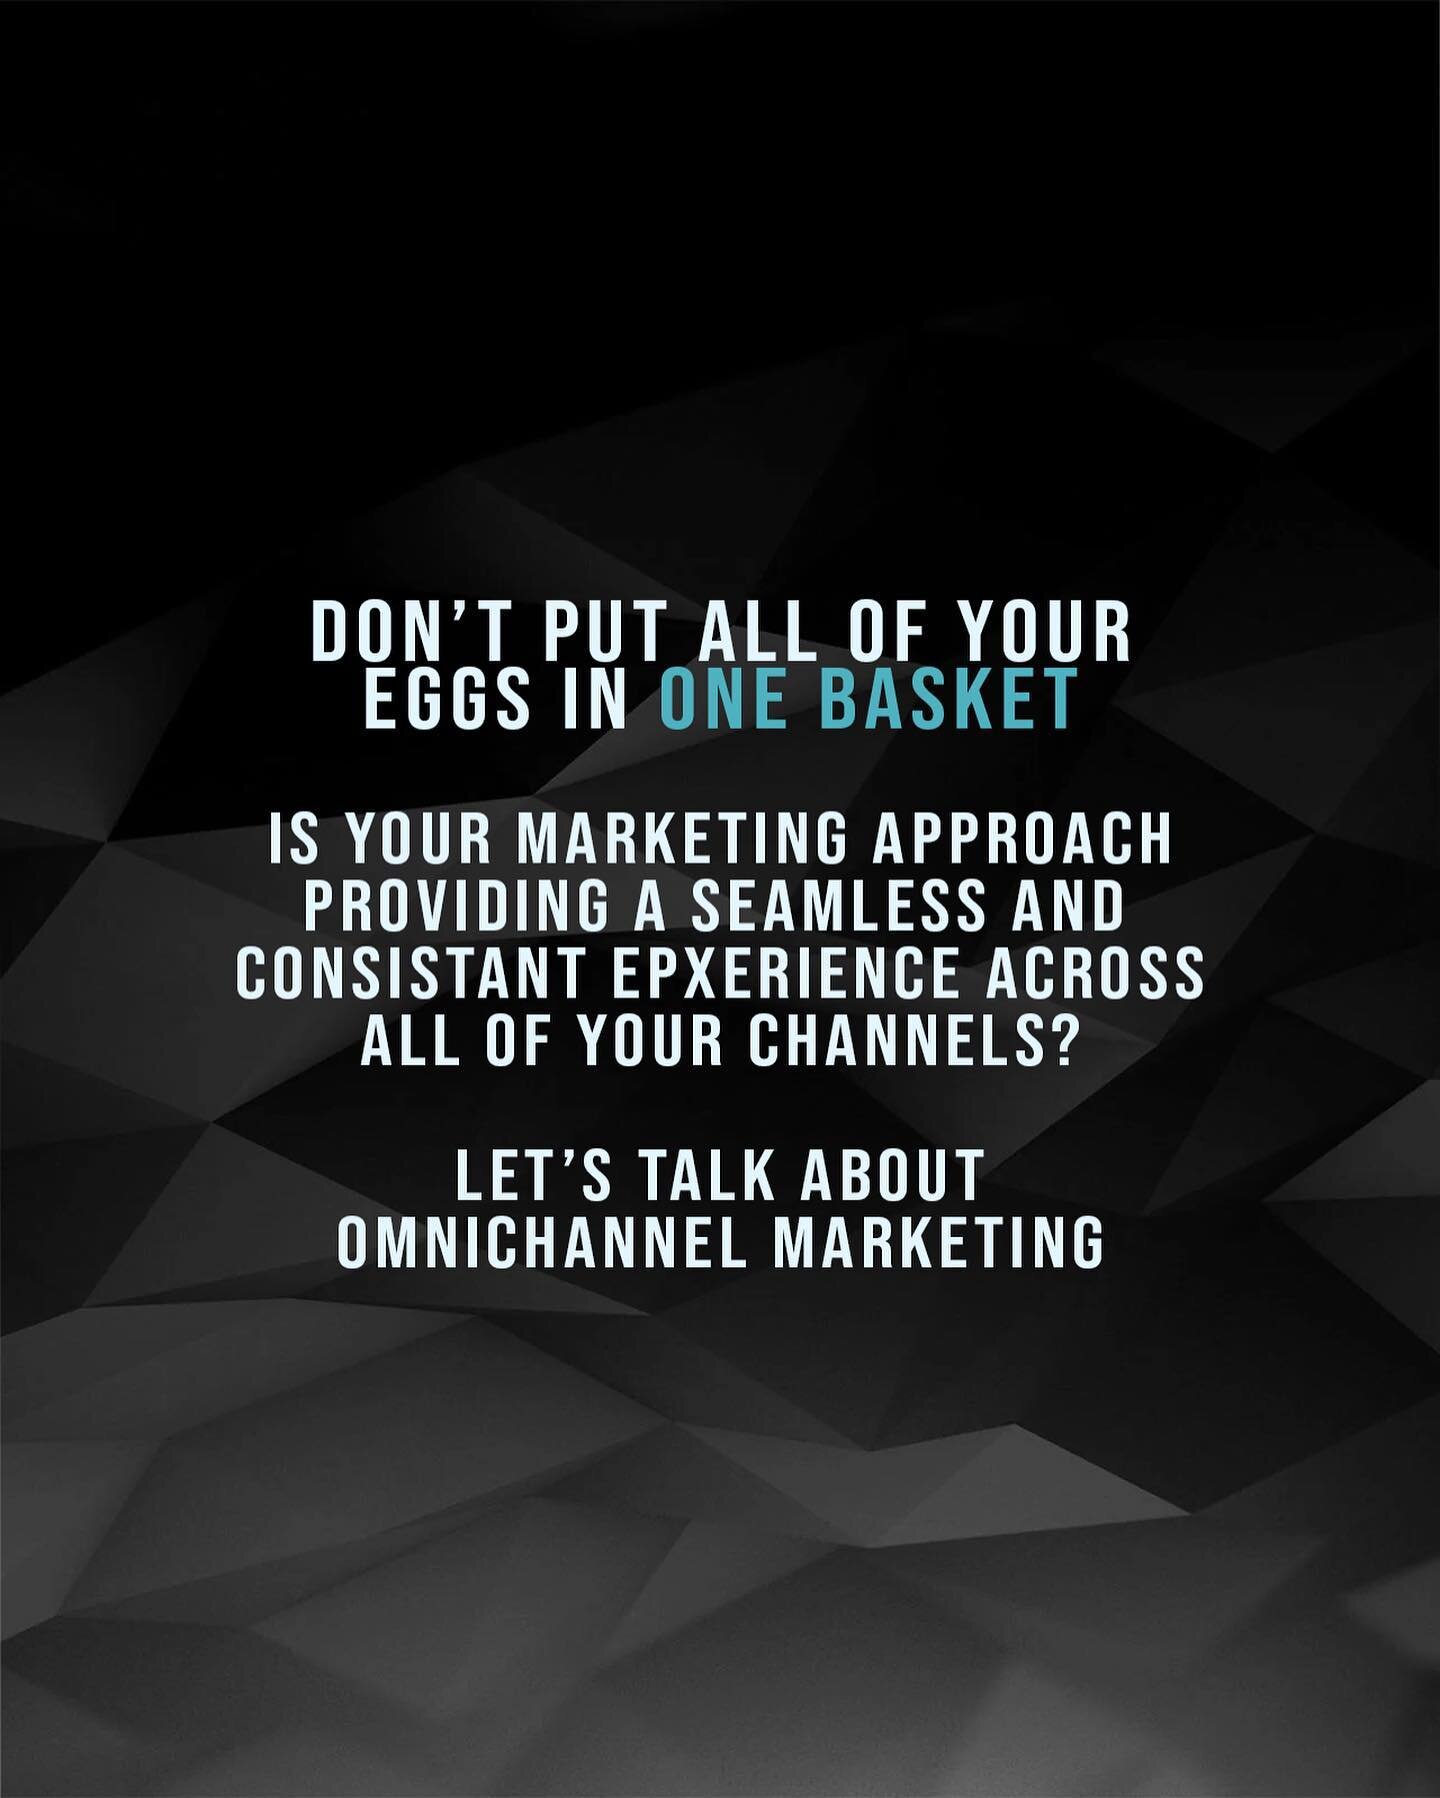 Omnichannel marketing is a fancy term for a marketing approach that aims to create a seamless and consistent experience for customers across all channels and touchpoints. By bringing together all the different channels and devices available, from soc